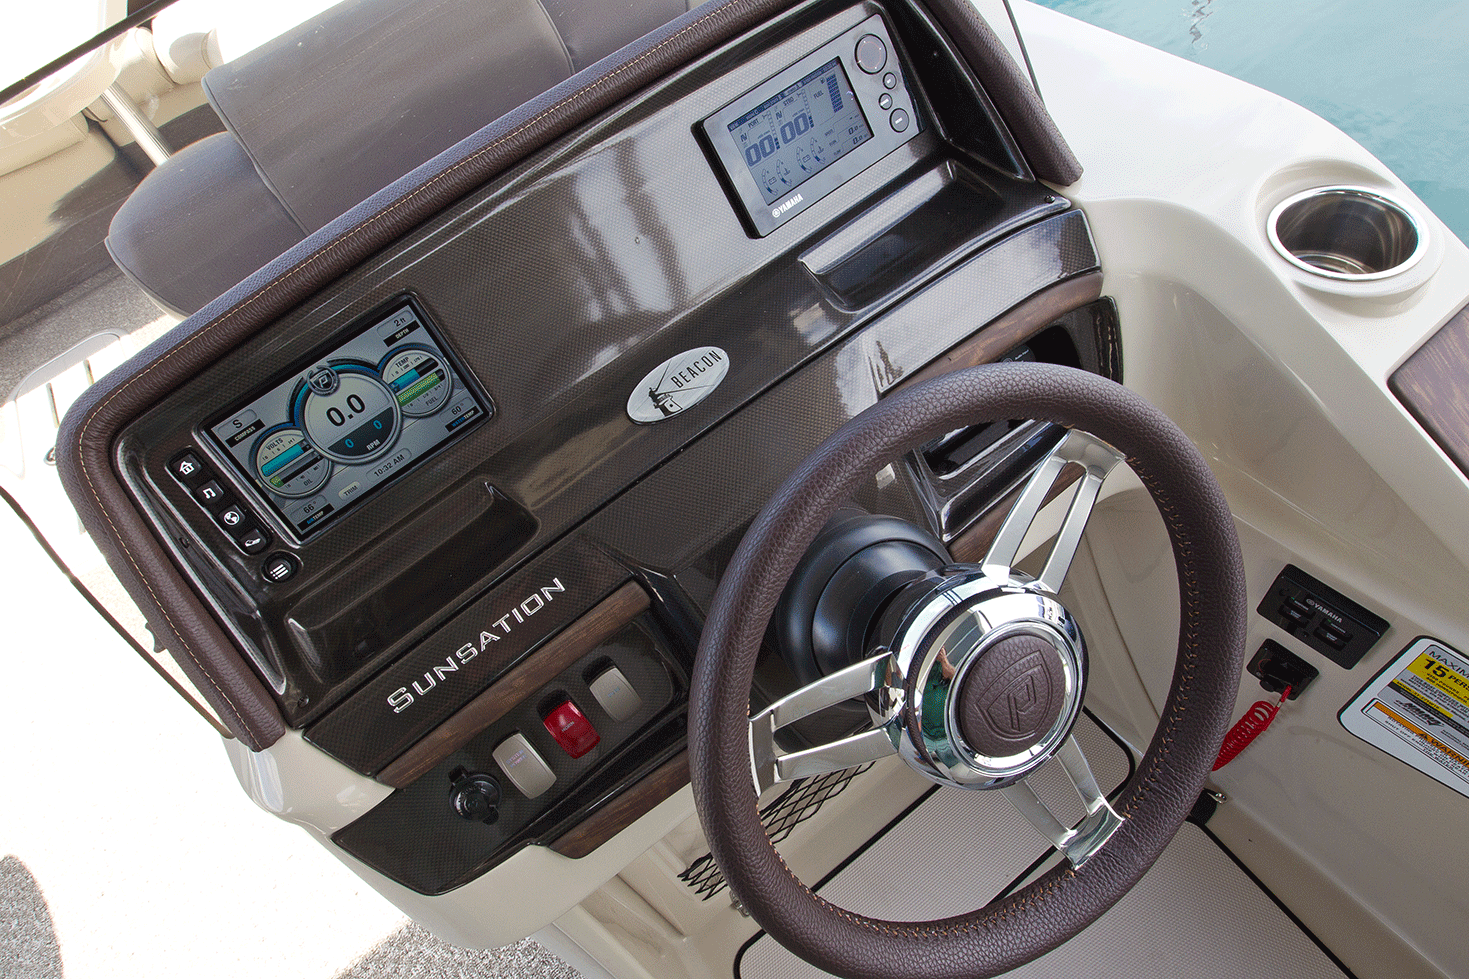 This Premier pontoon boat has all of its systems integrated into an ind=dash touchscreen unit, one of many electronics options available on pontoon boats. 